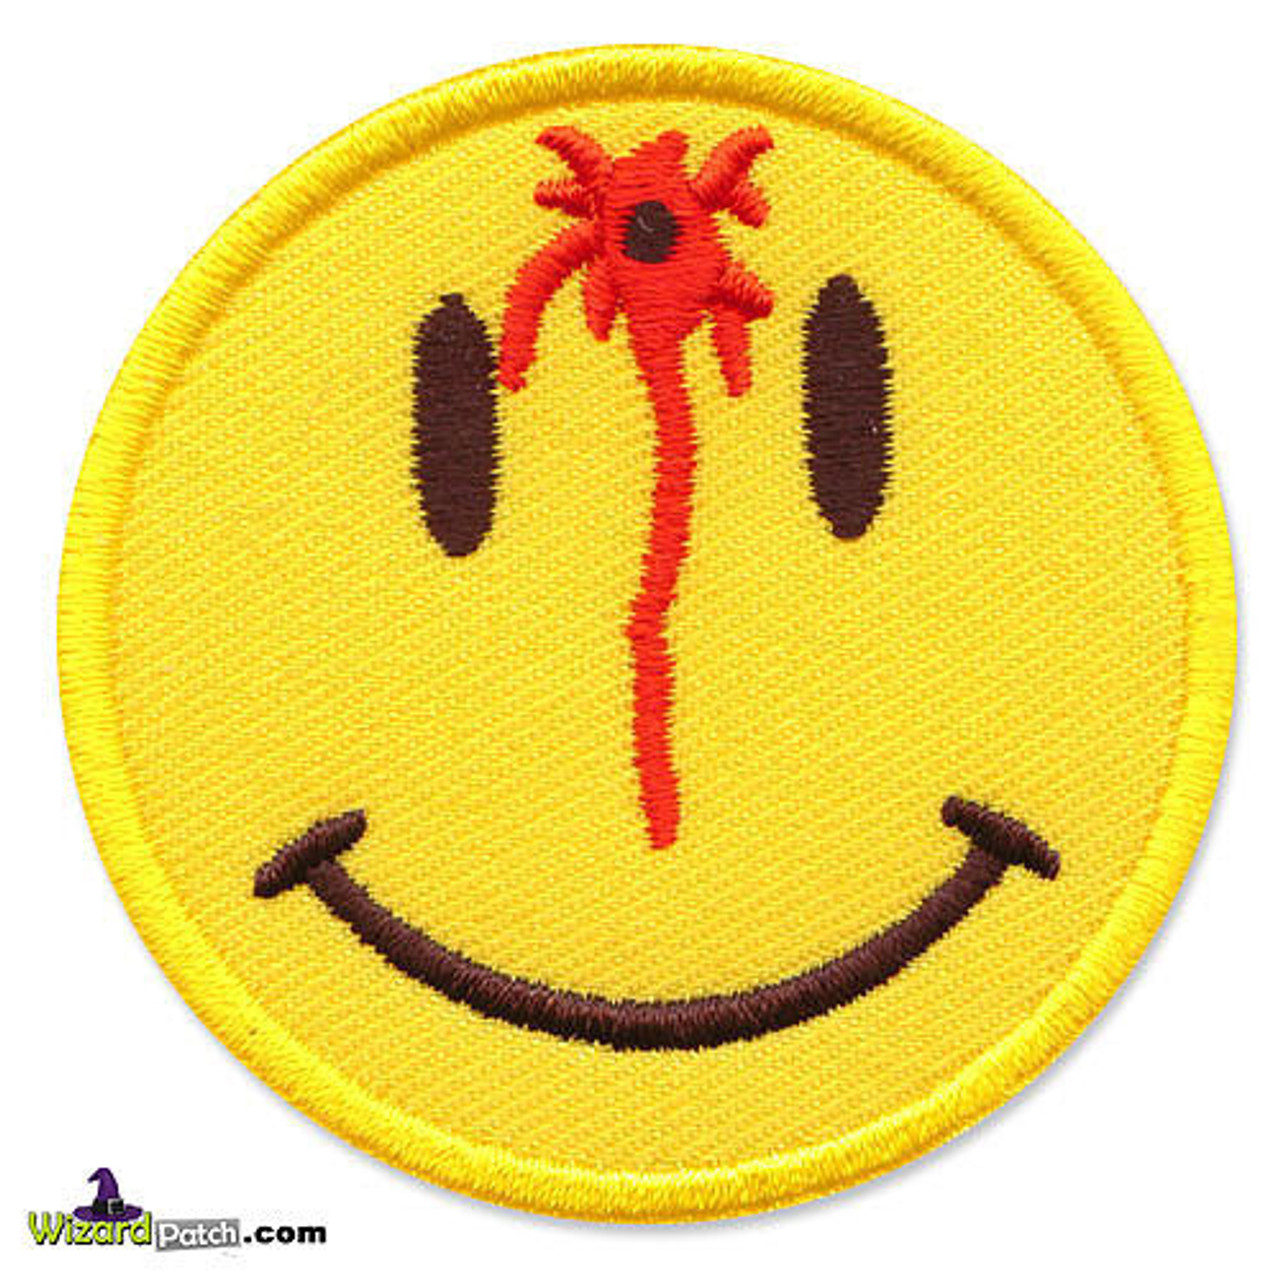 Hot Leathers PPL9328 Smiley Face Bullet Hole Embroidered 3 x 3 Patch